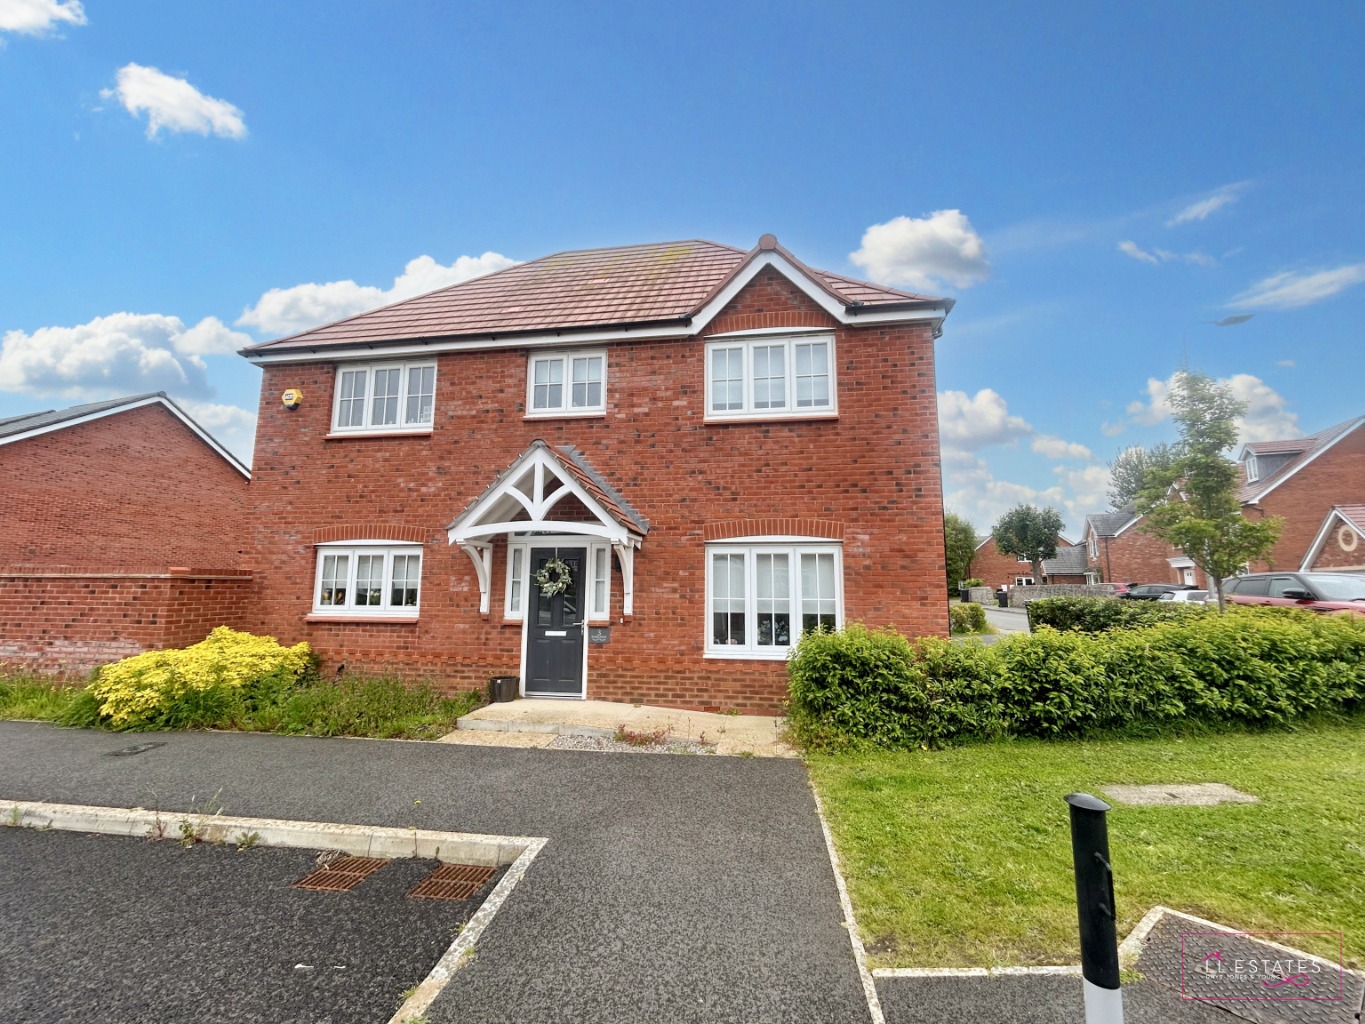 4 bed detached house for sale in Bryn Twr - Property Image 1